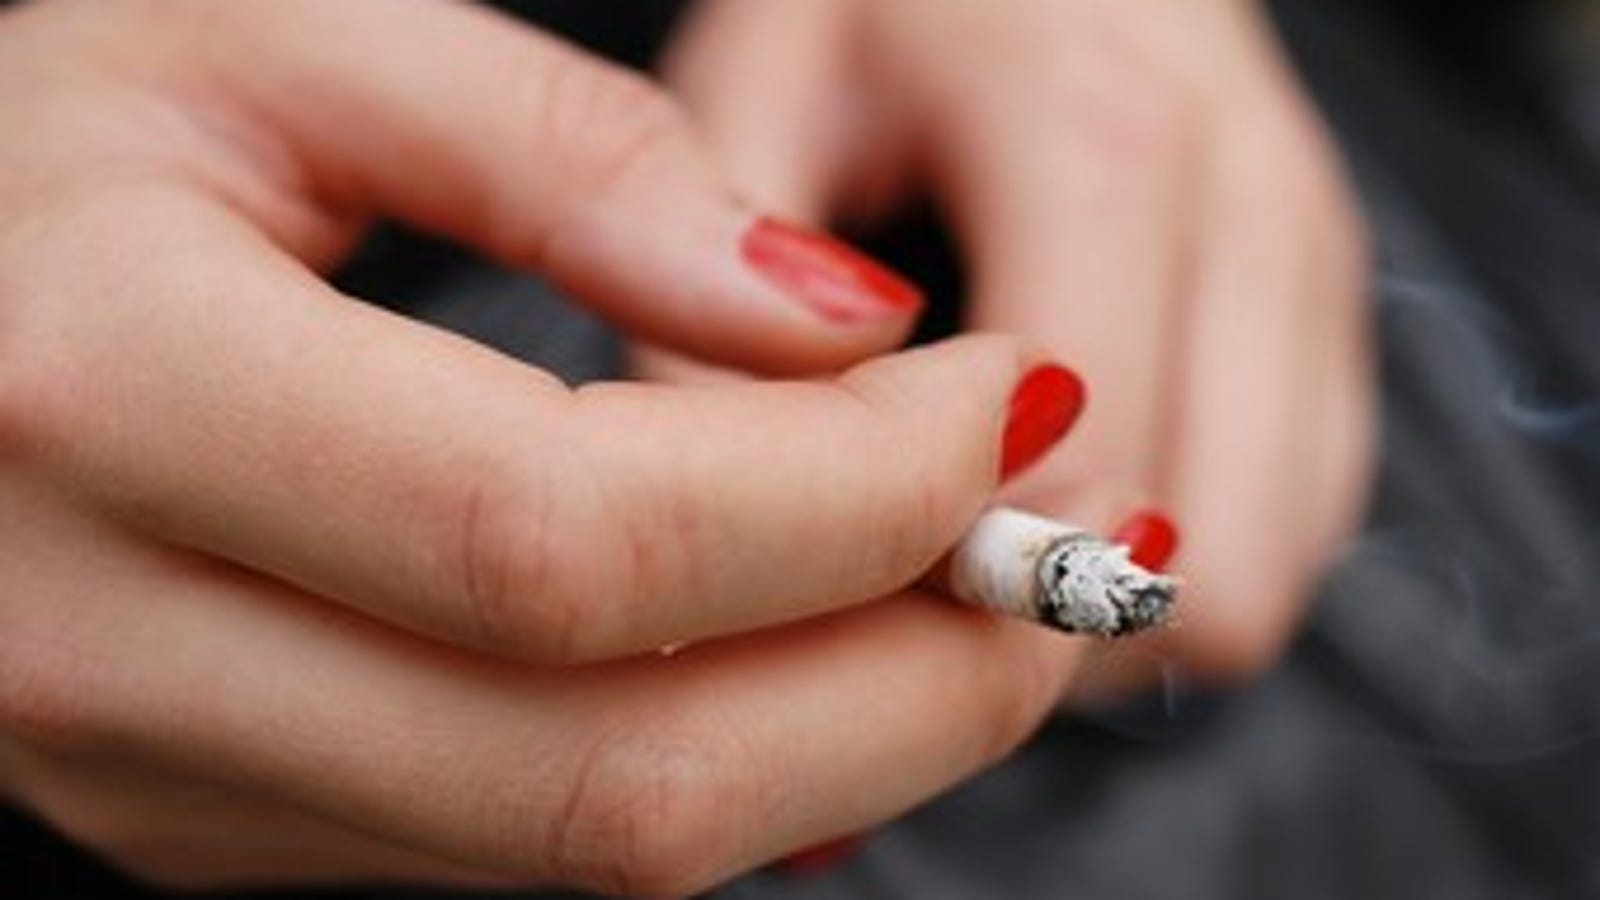 French Women Smoke To Remain Thin At All Costs